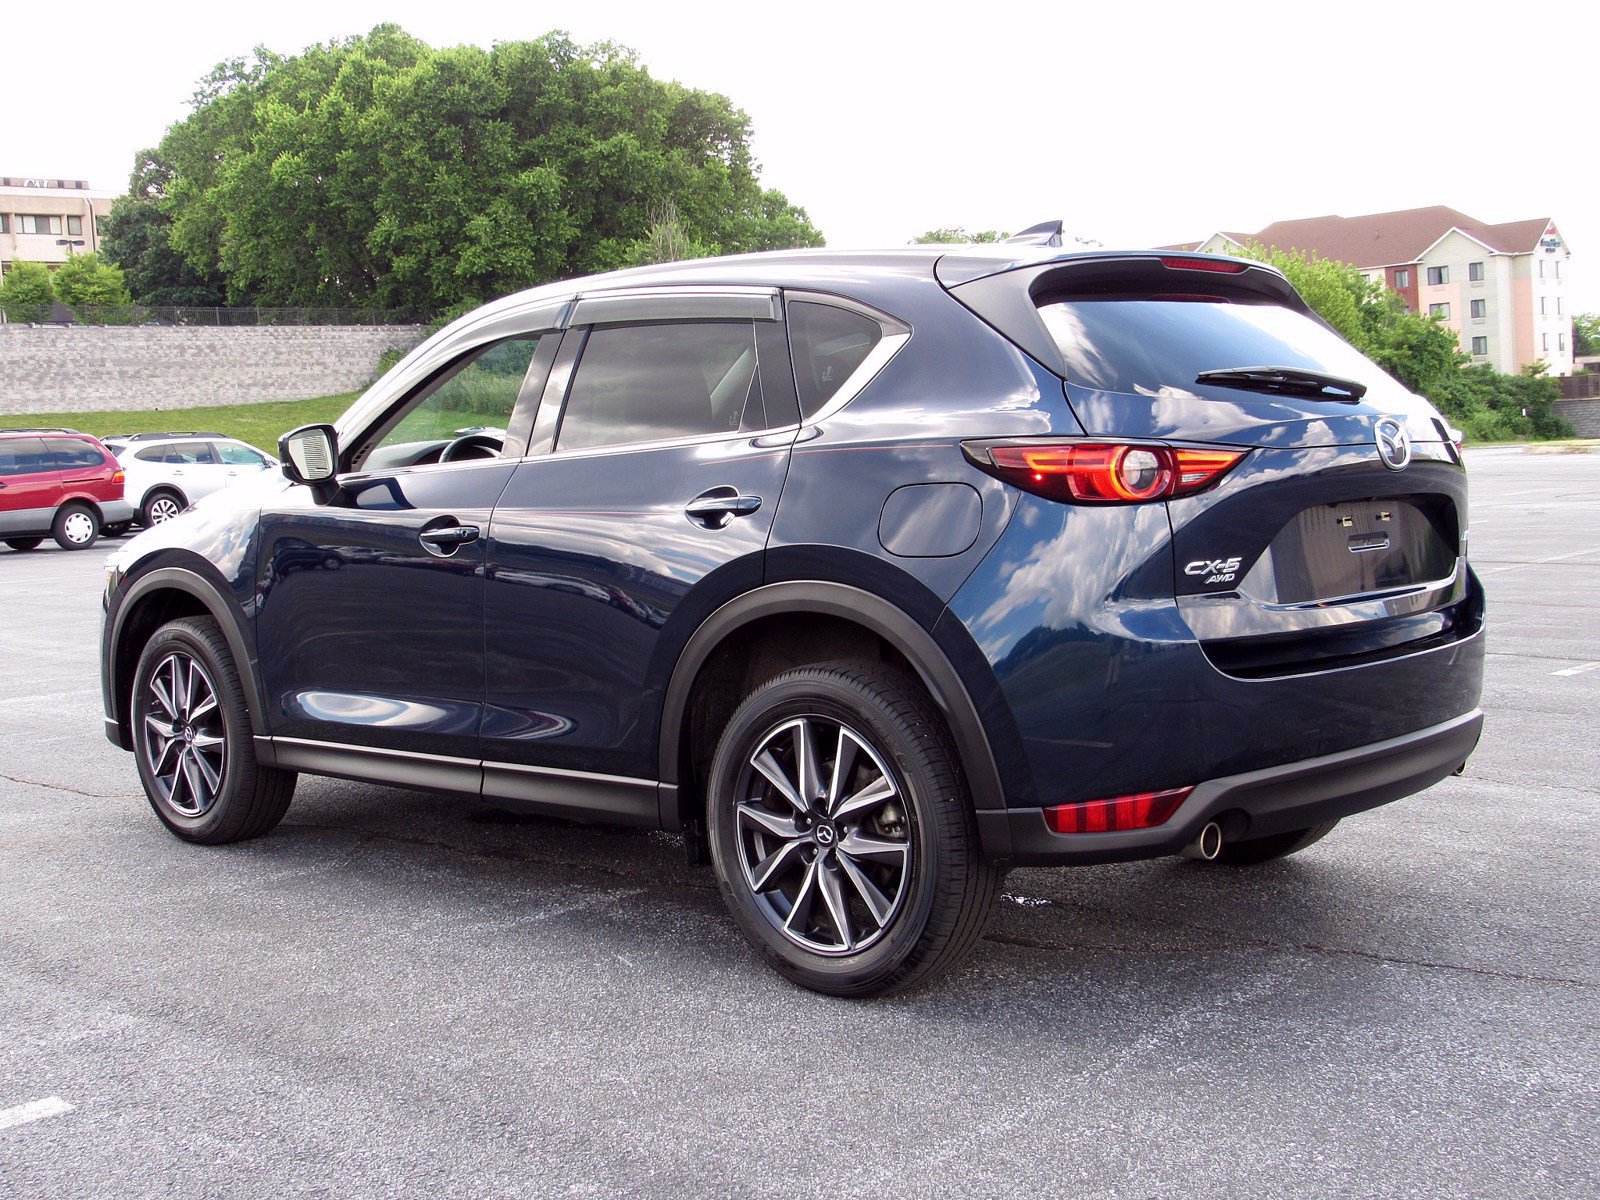 Pre Owned 2018 Mazda Cx 5 Grand Touring Awd Sport Utility